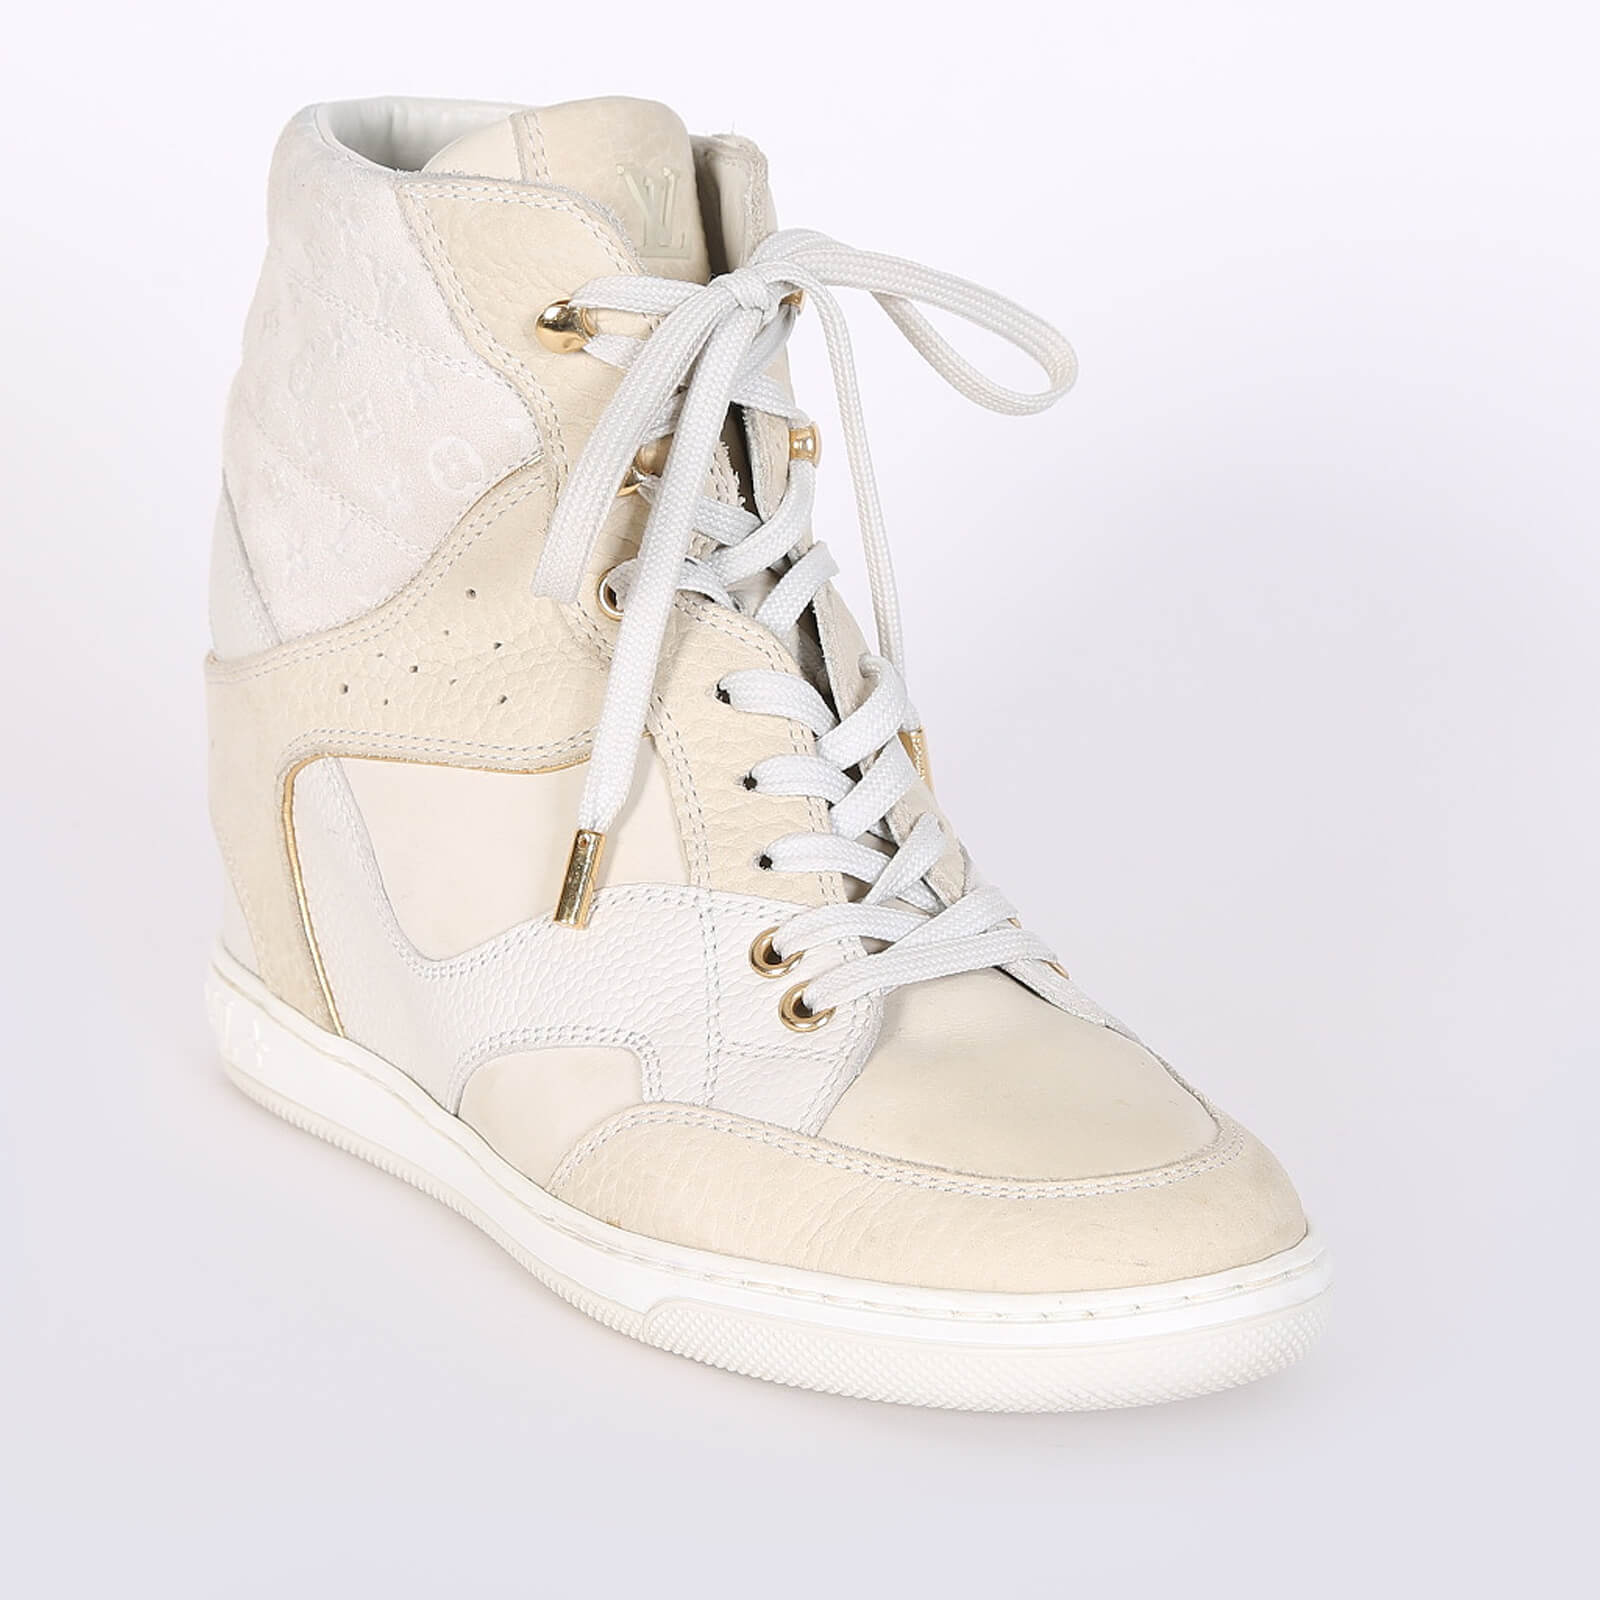 Louis Vuitton Beige Leather Cliff Top Sneaker Wedges Size 8.5/39